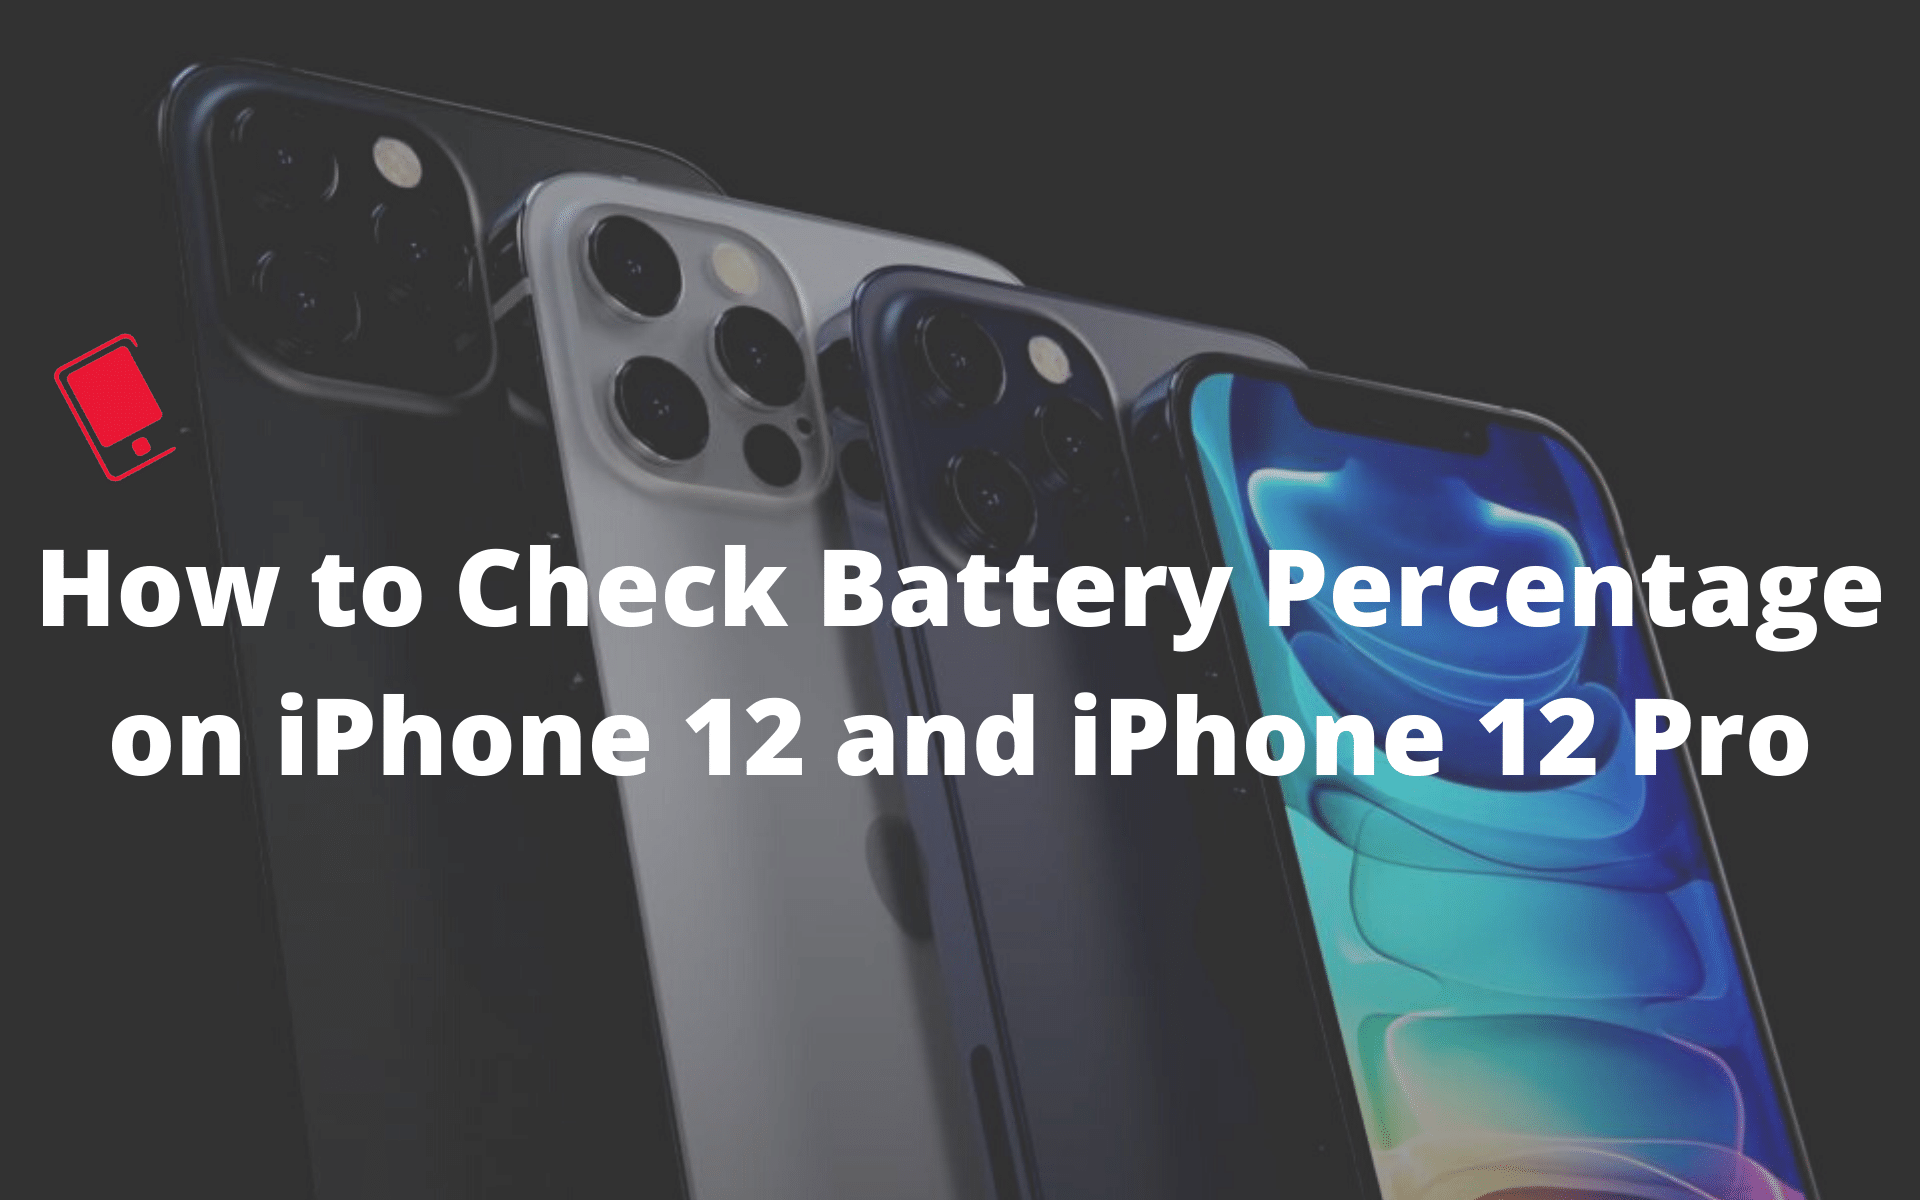 check battery percentage of iPhone 12